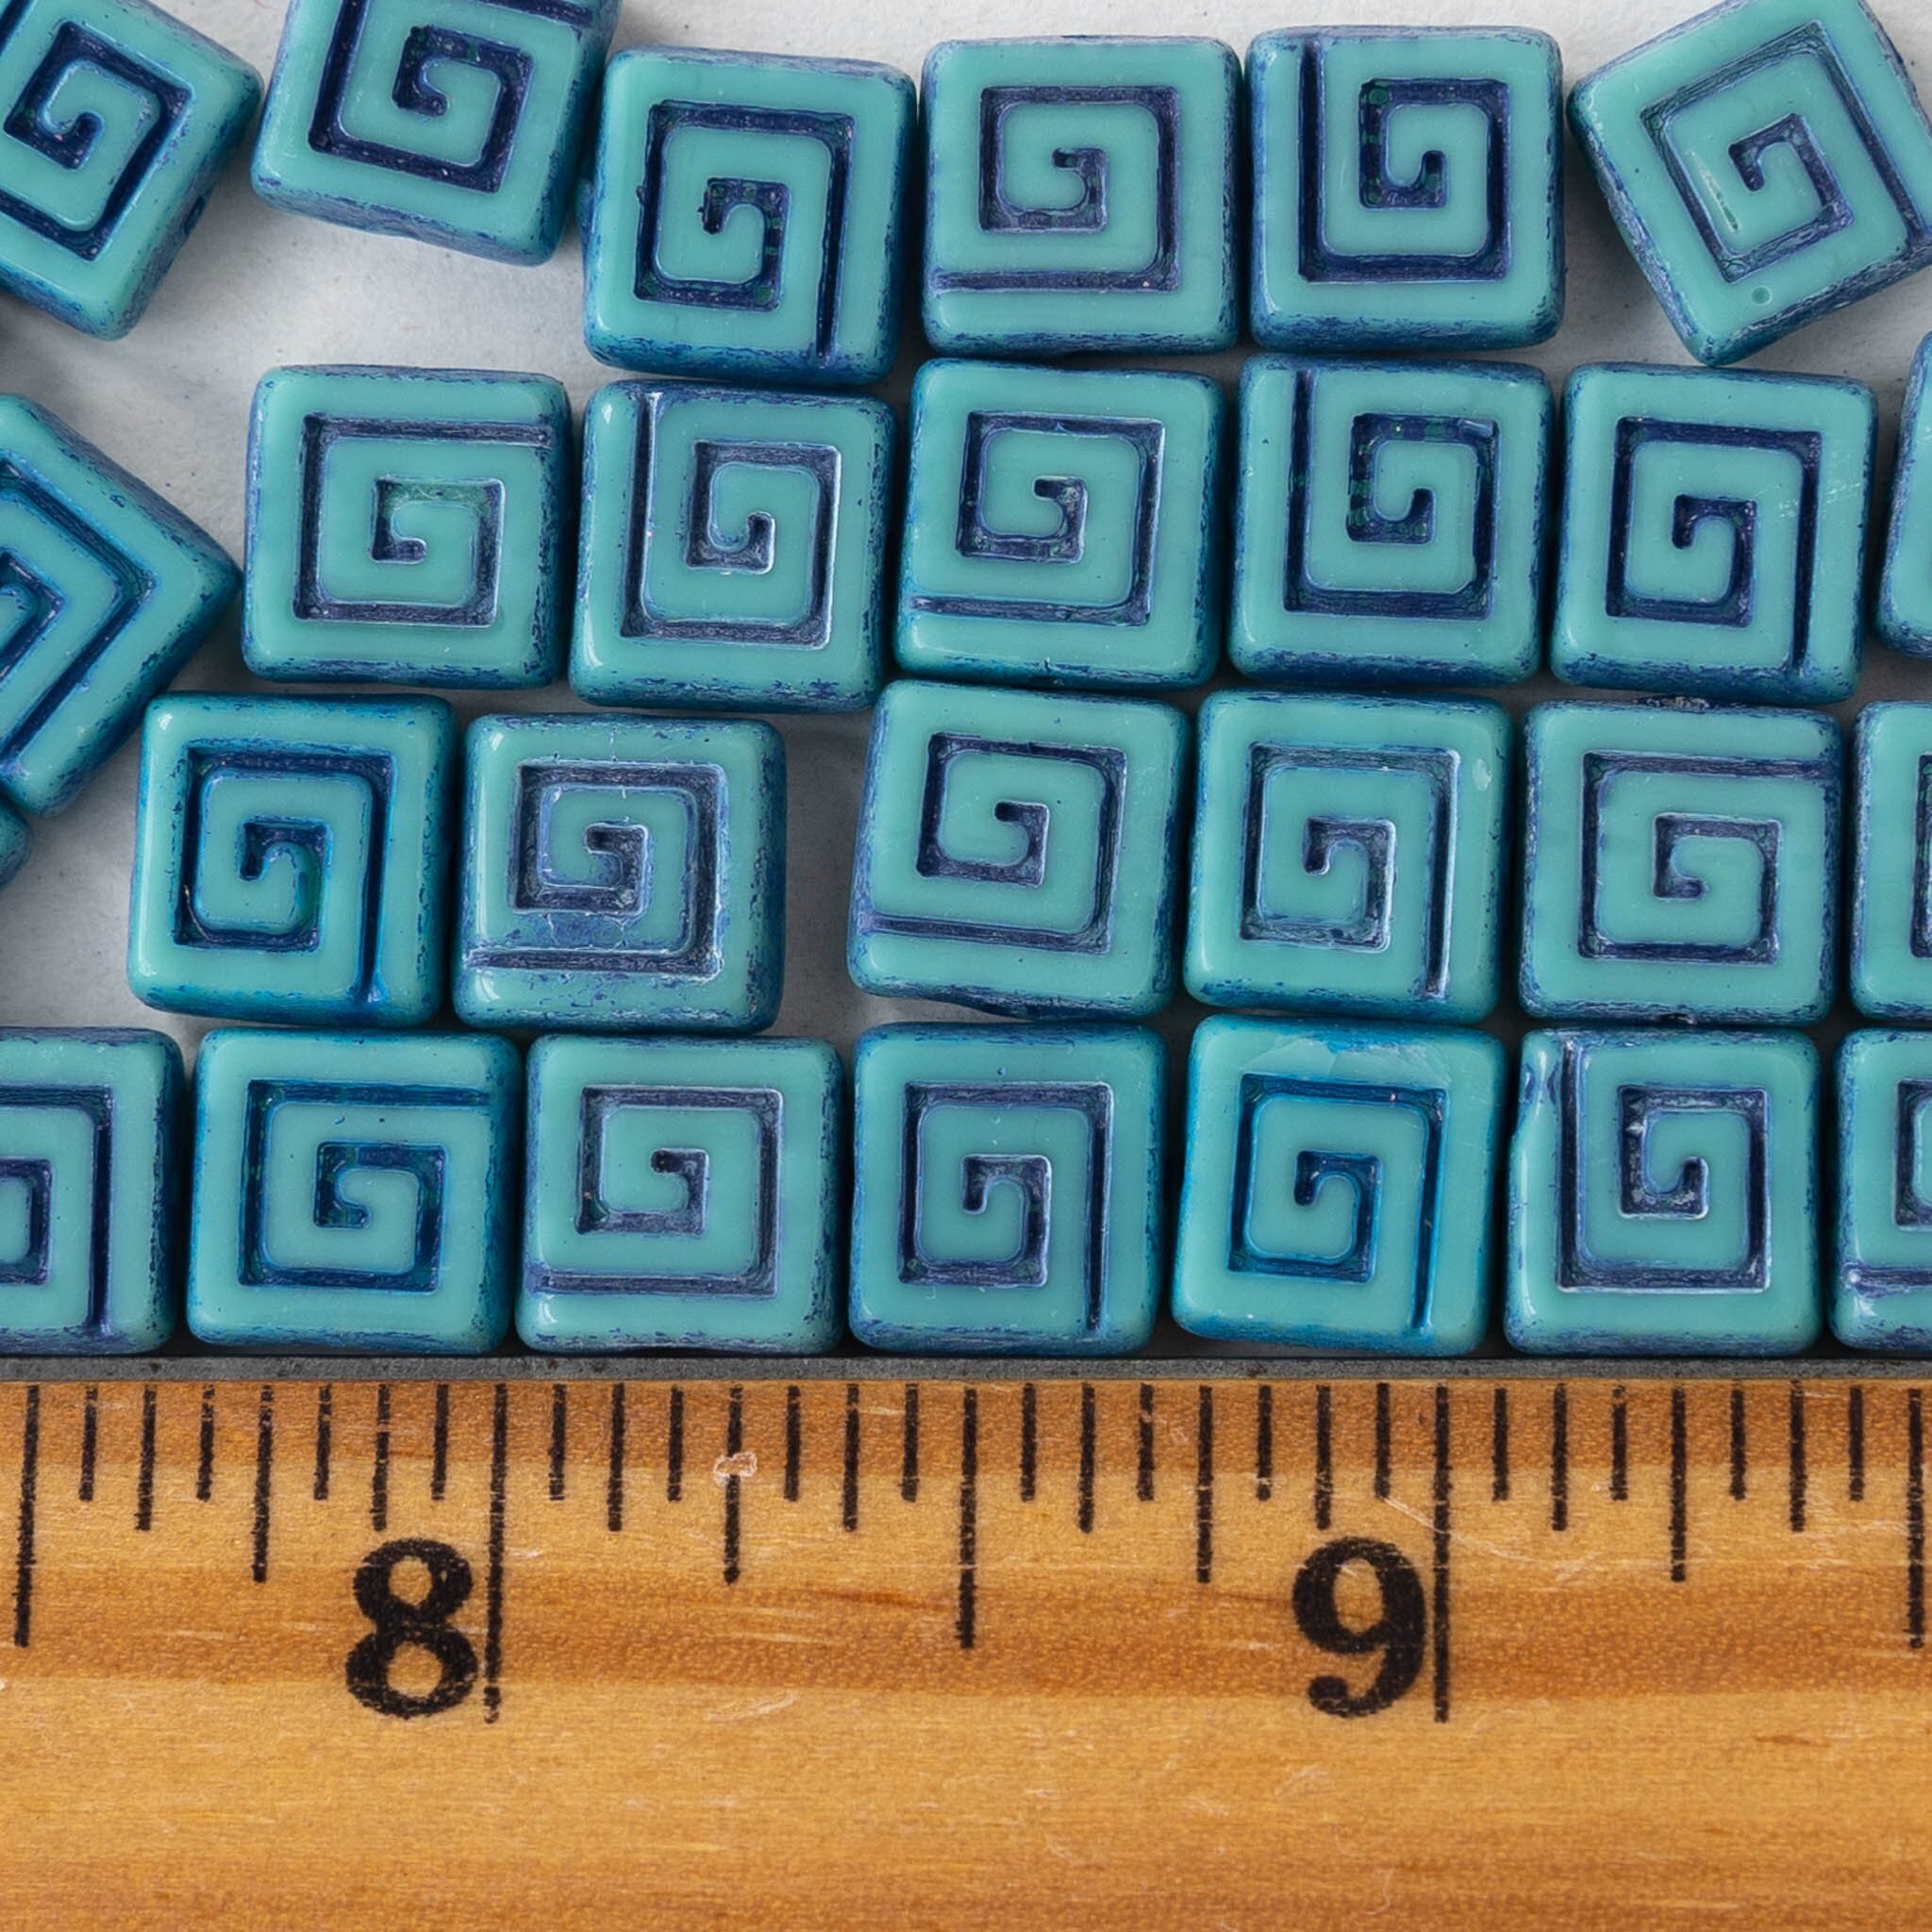 2x3mm Tiny Turquoise Tube Seed Beads Natural Turquoise Beads for